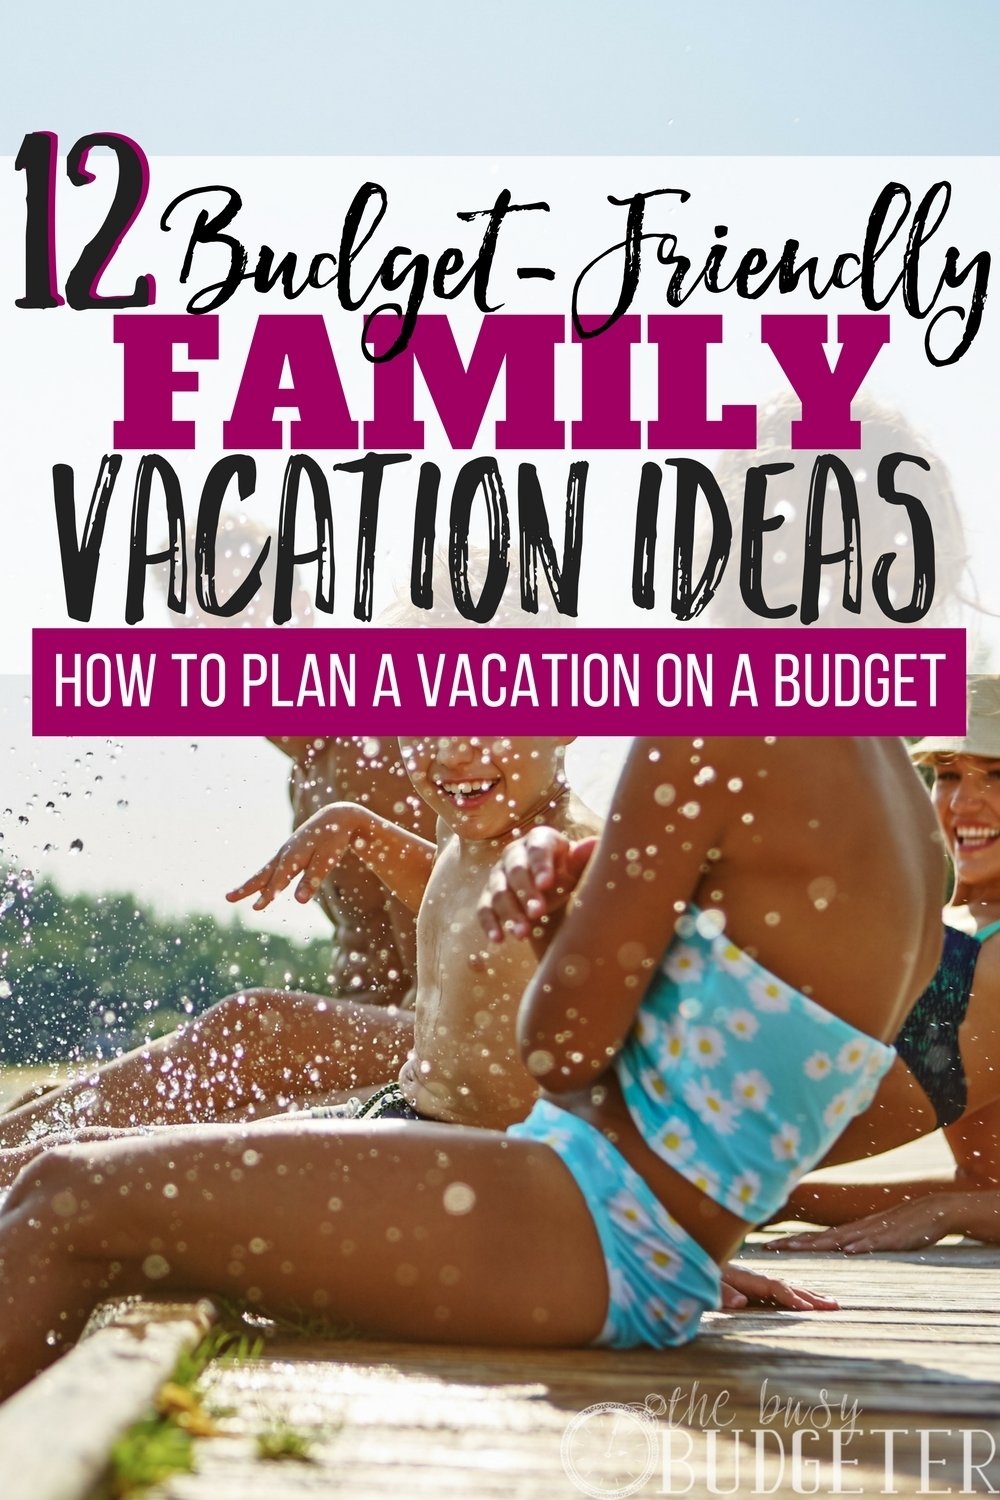 10 Lovely Family Vacation Ideas On A Budget how to plan a vacation on a budget 12 vacation ideas busy budgeter 1 2022